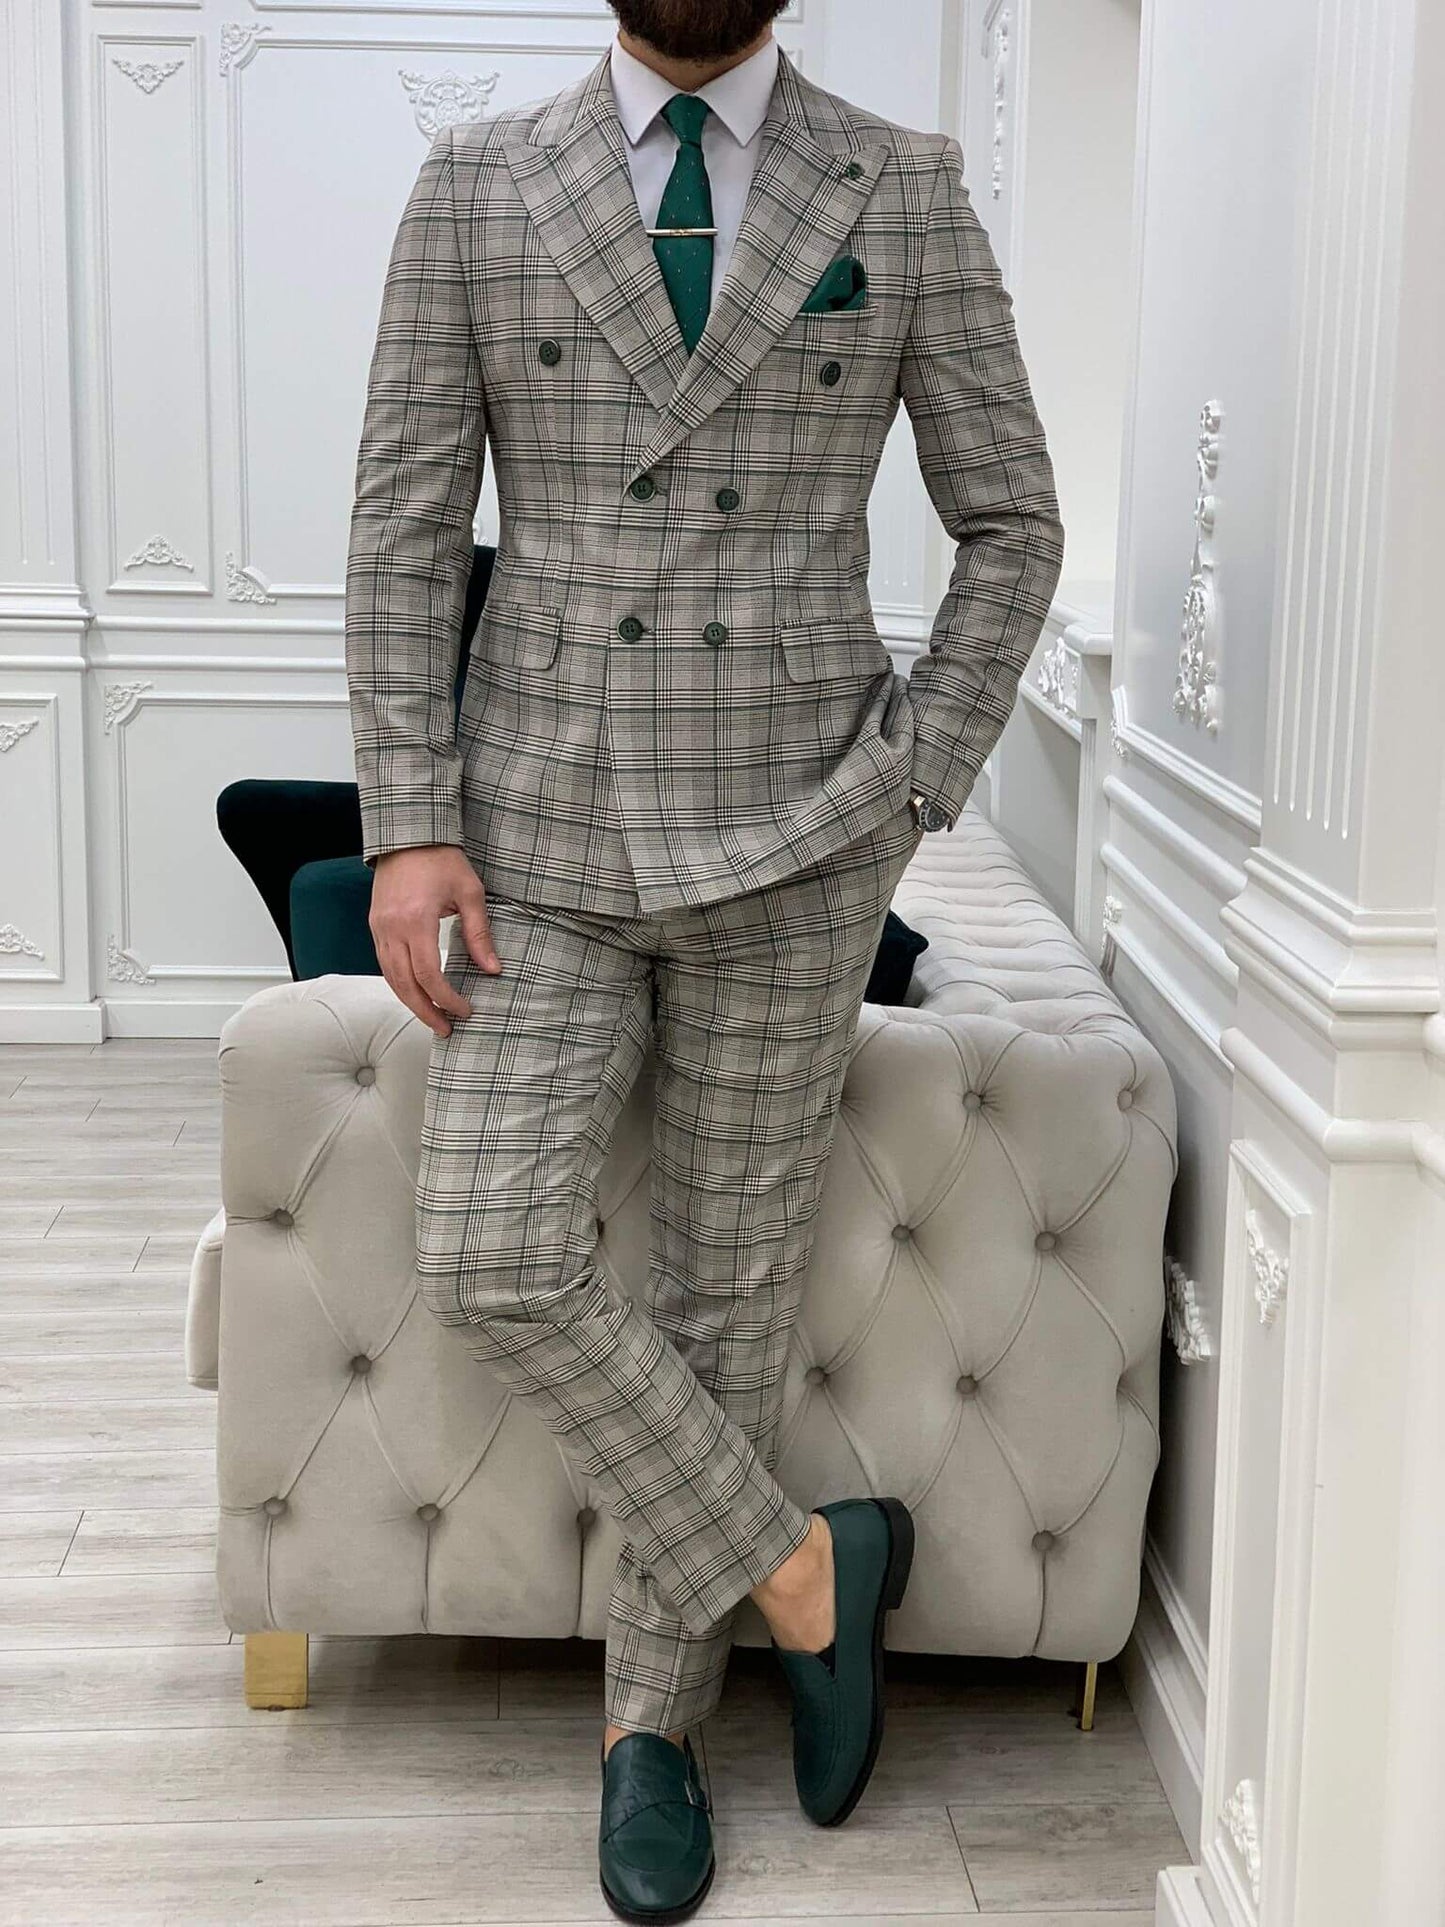 Green Double Breasted Suit